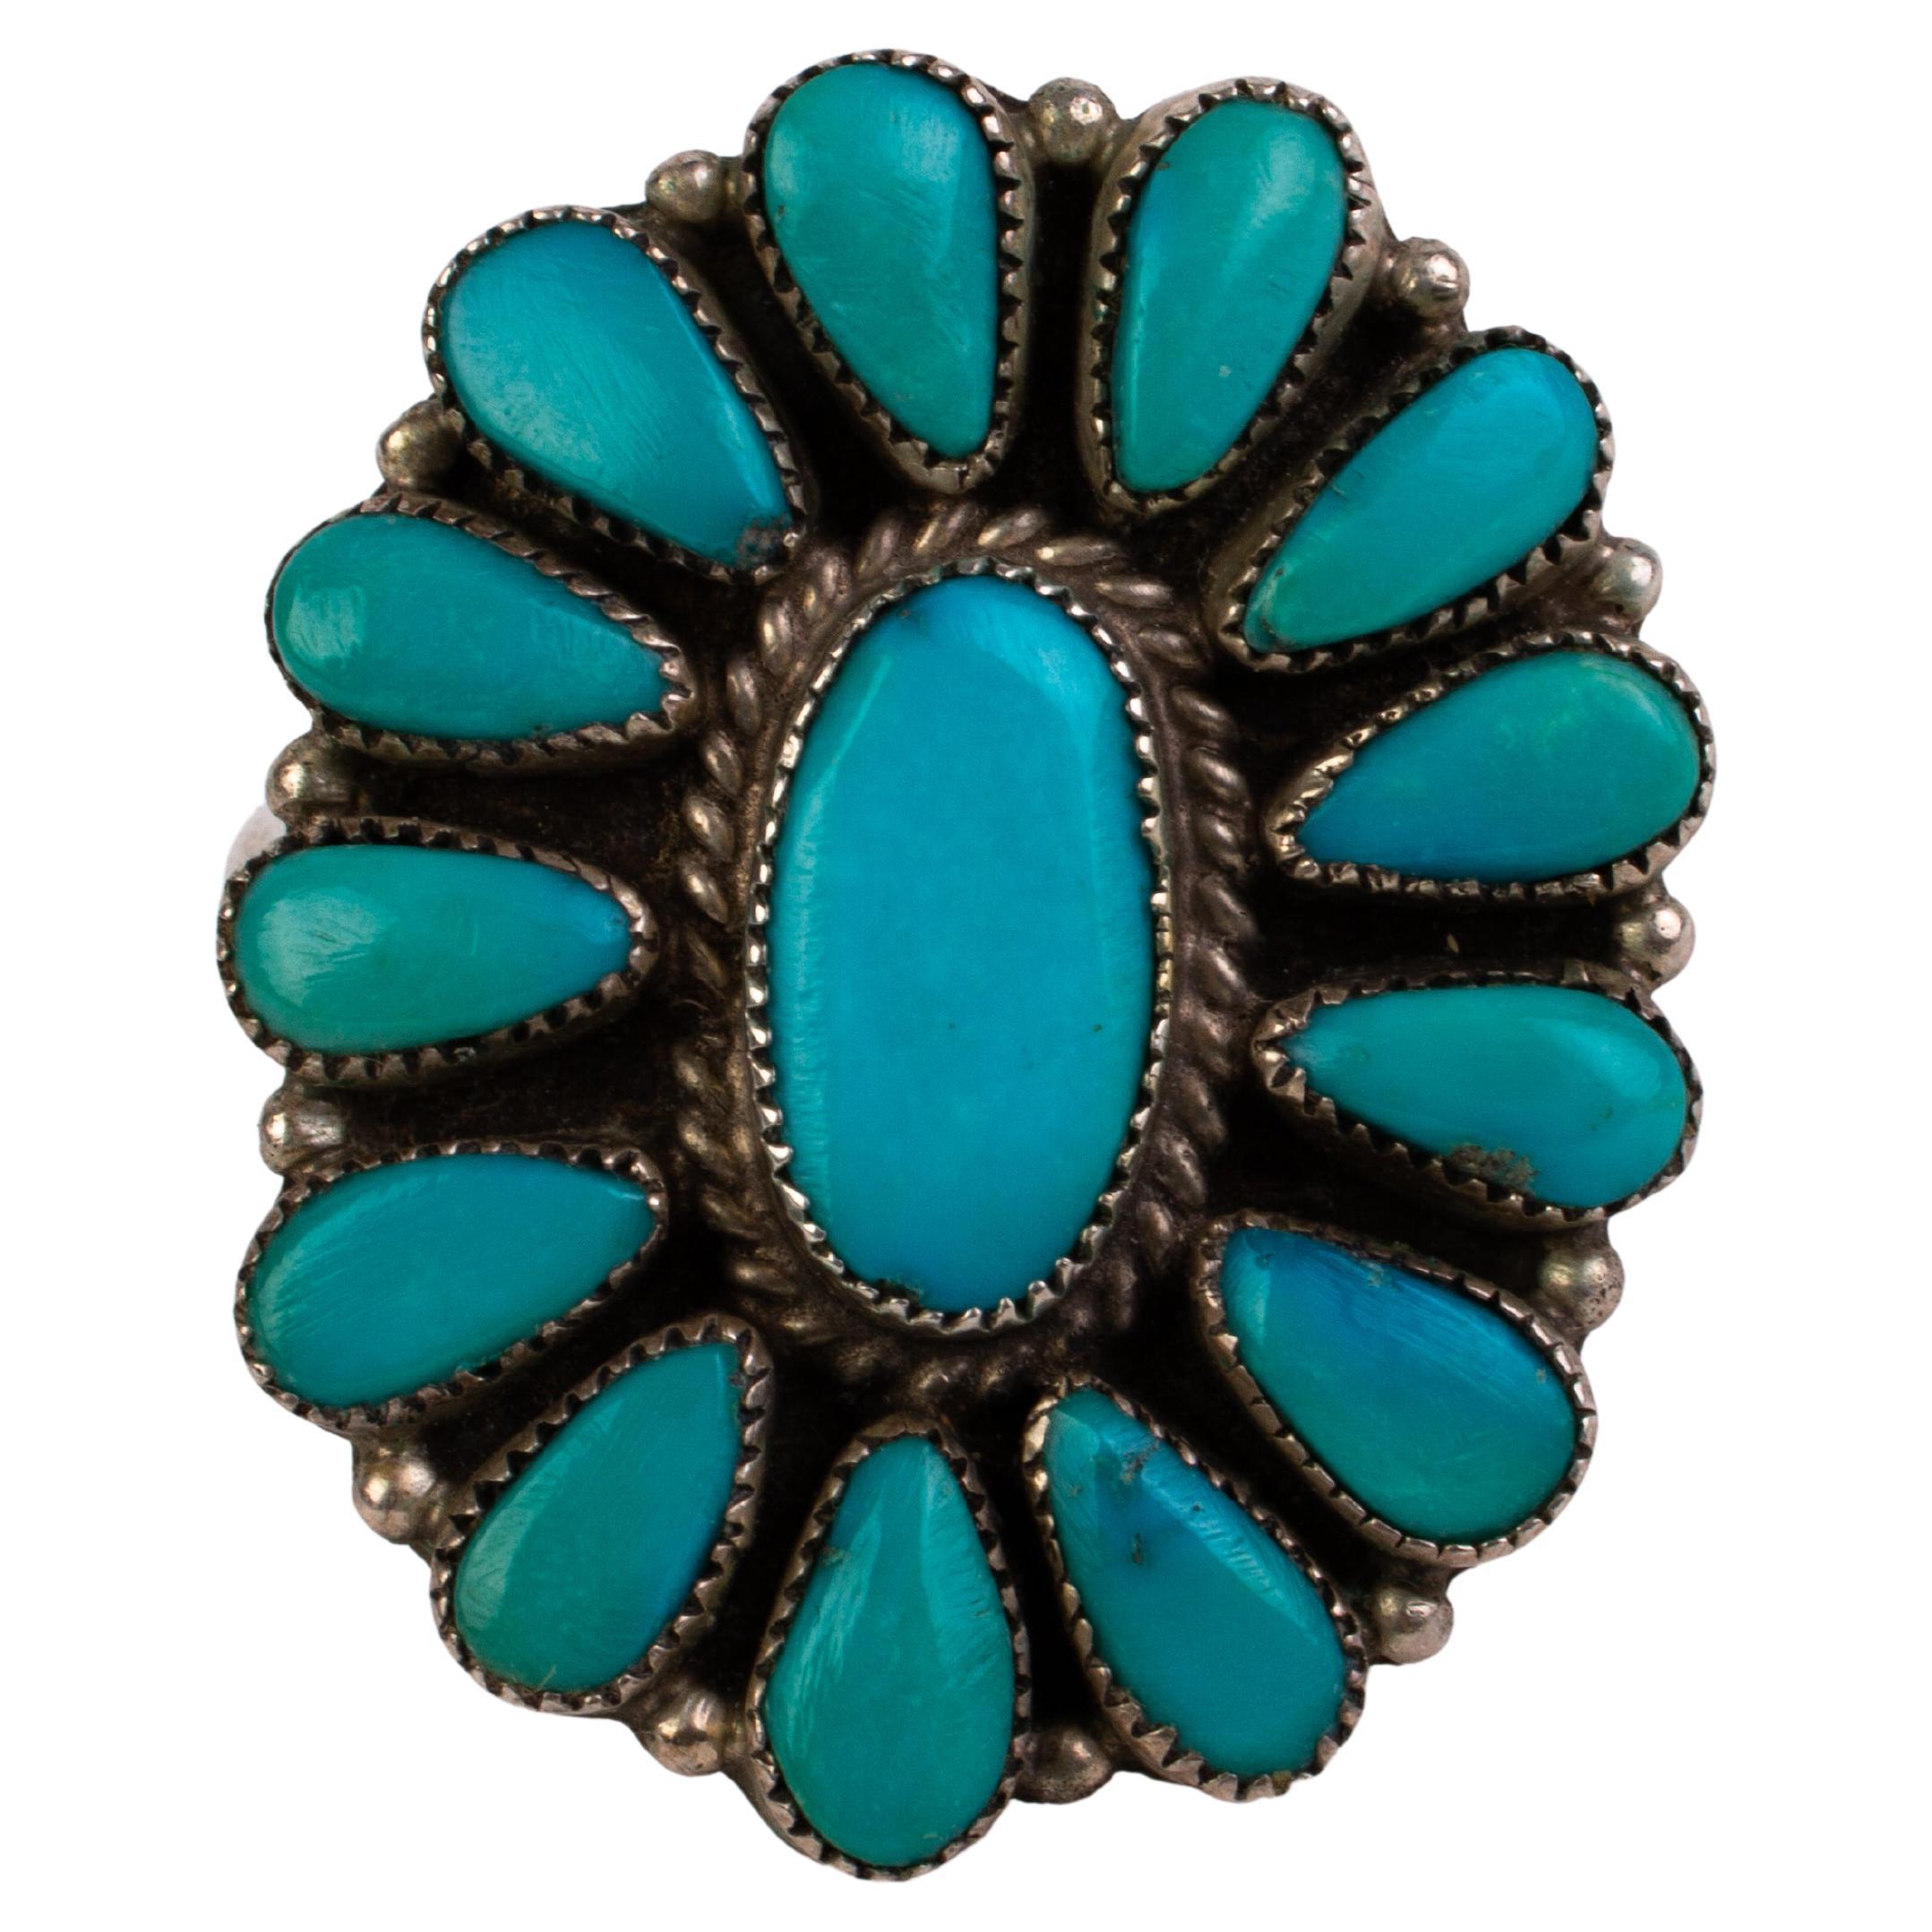 Navajo Native American Natural Turquoise Sterling Silver Ring 